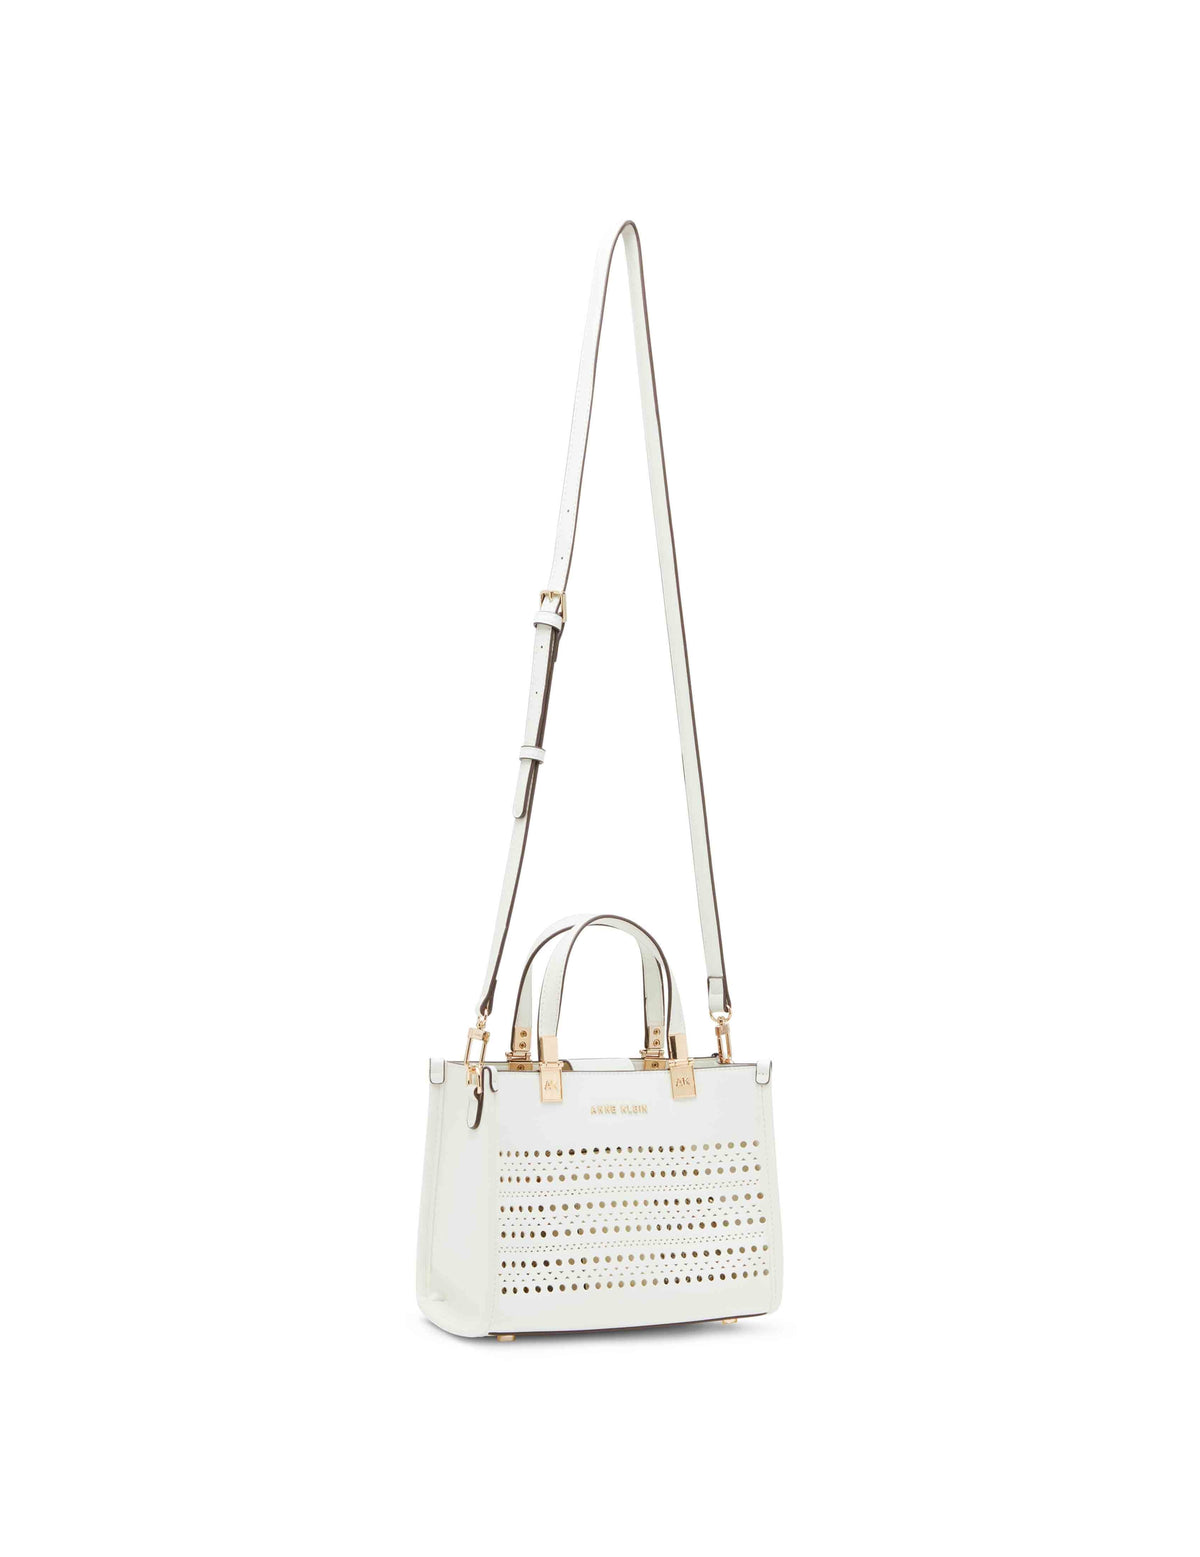 Anne Klein  Perforated Mini Satchel With Convertible Straw Crossbody